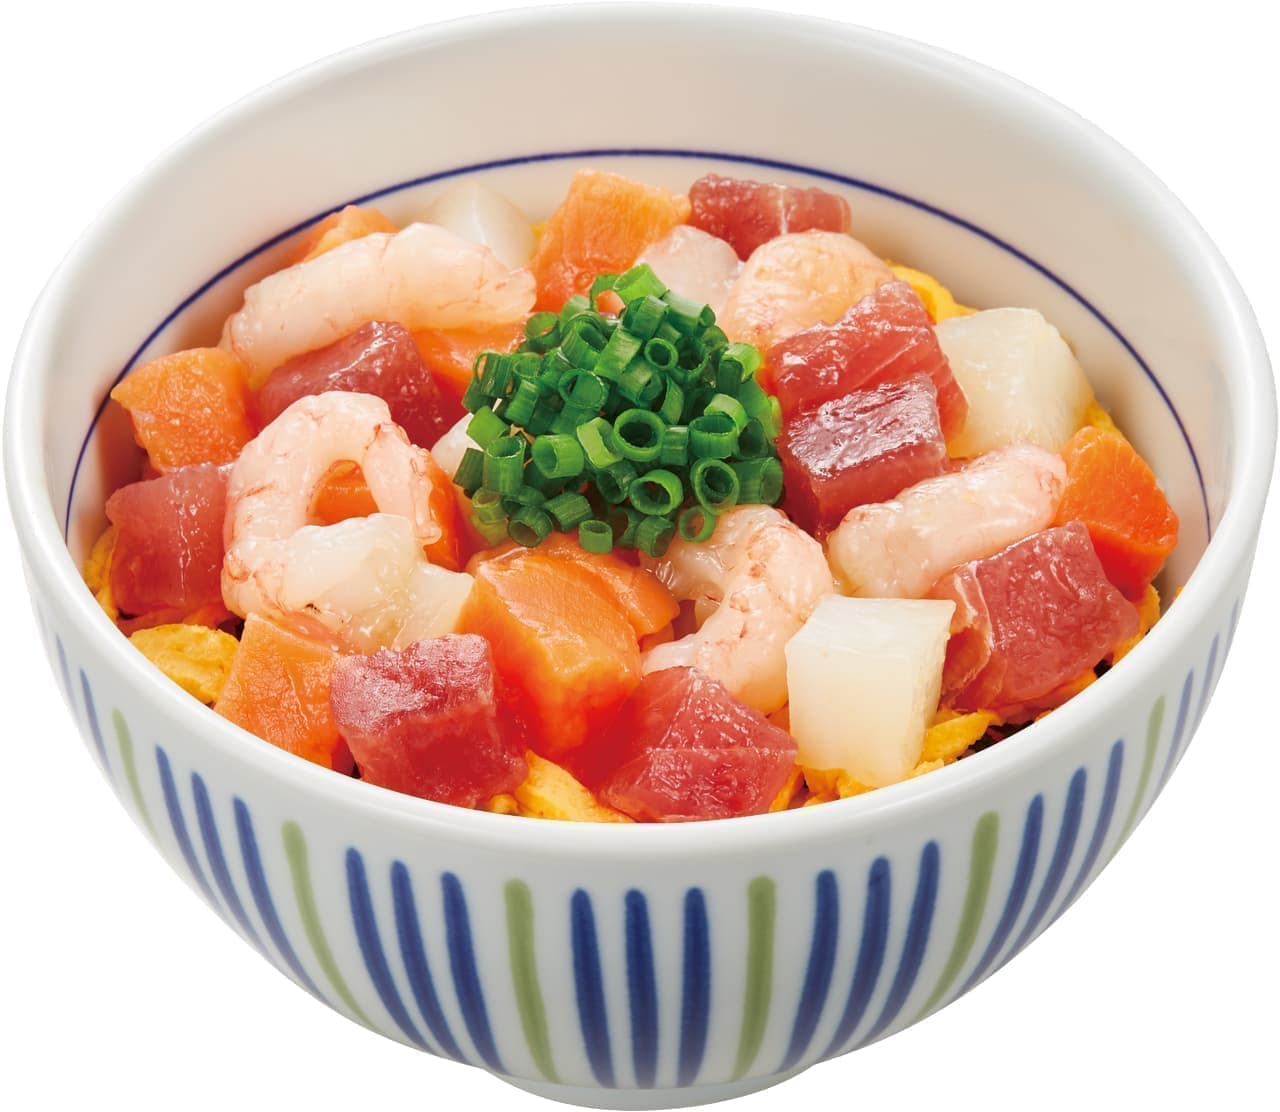 "Kaisendon" for a limited time in Nakau